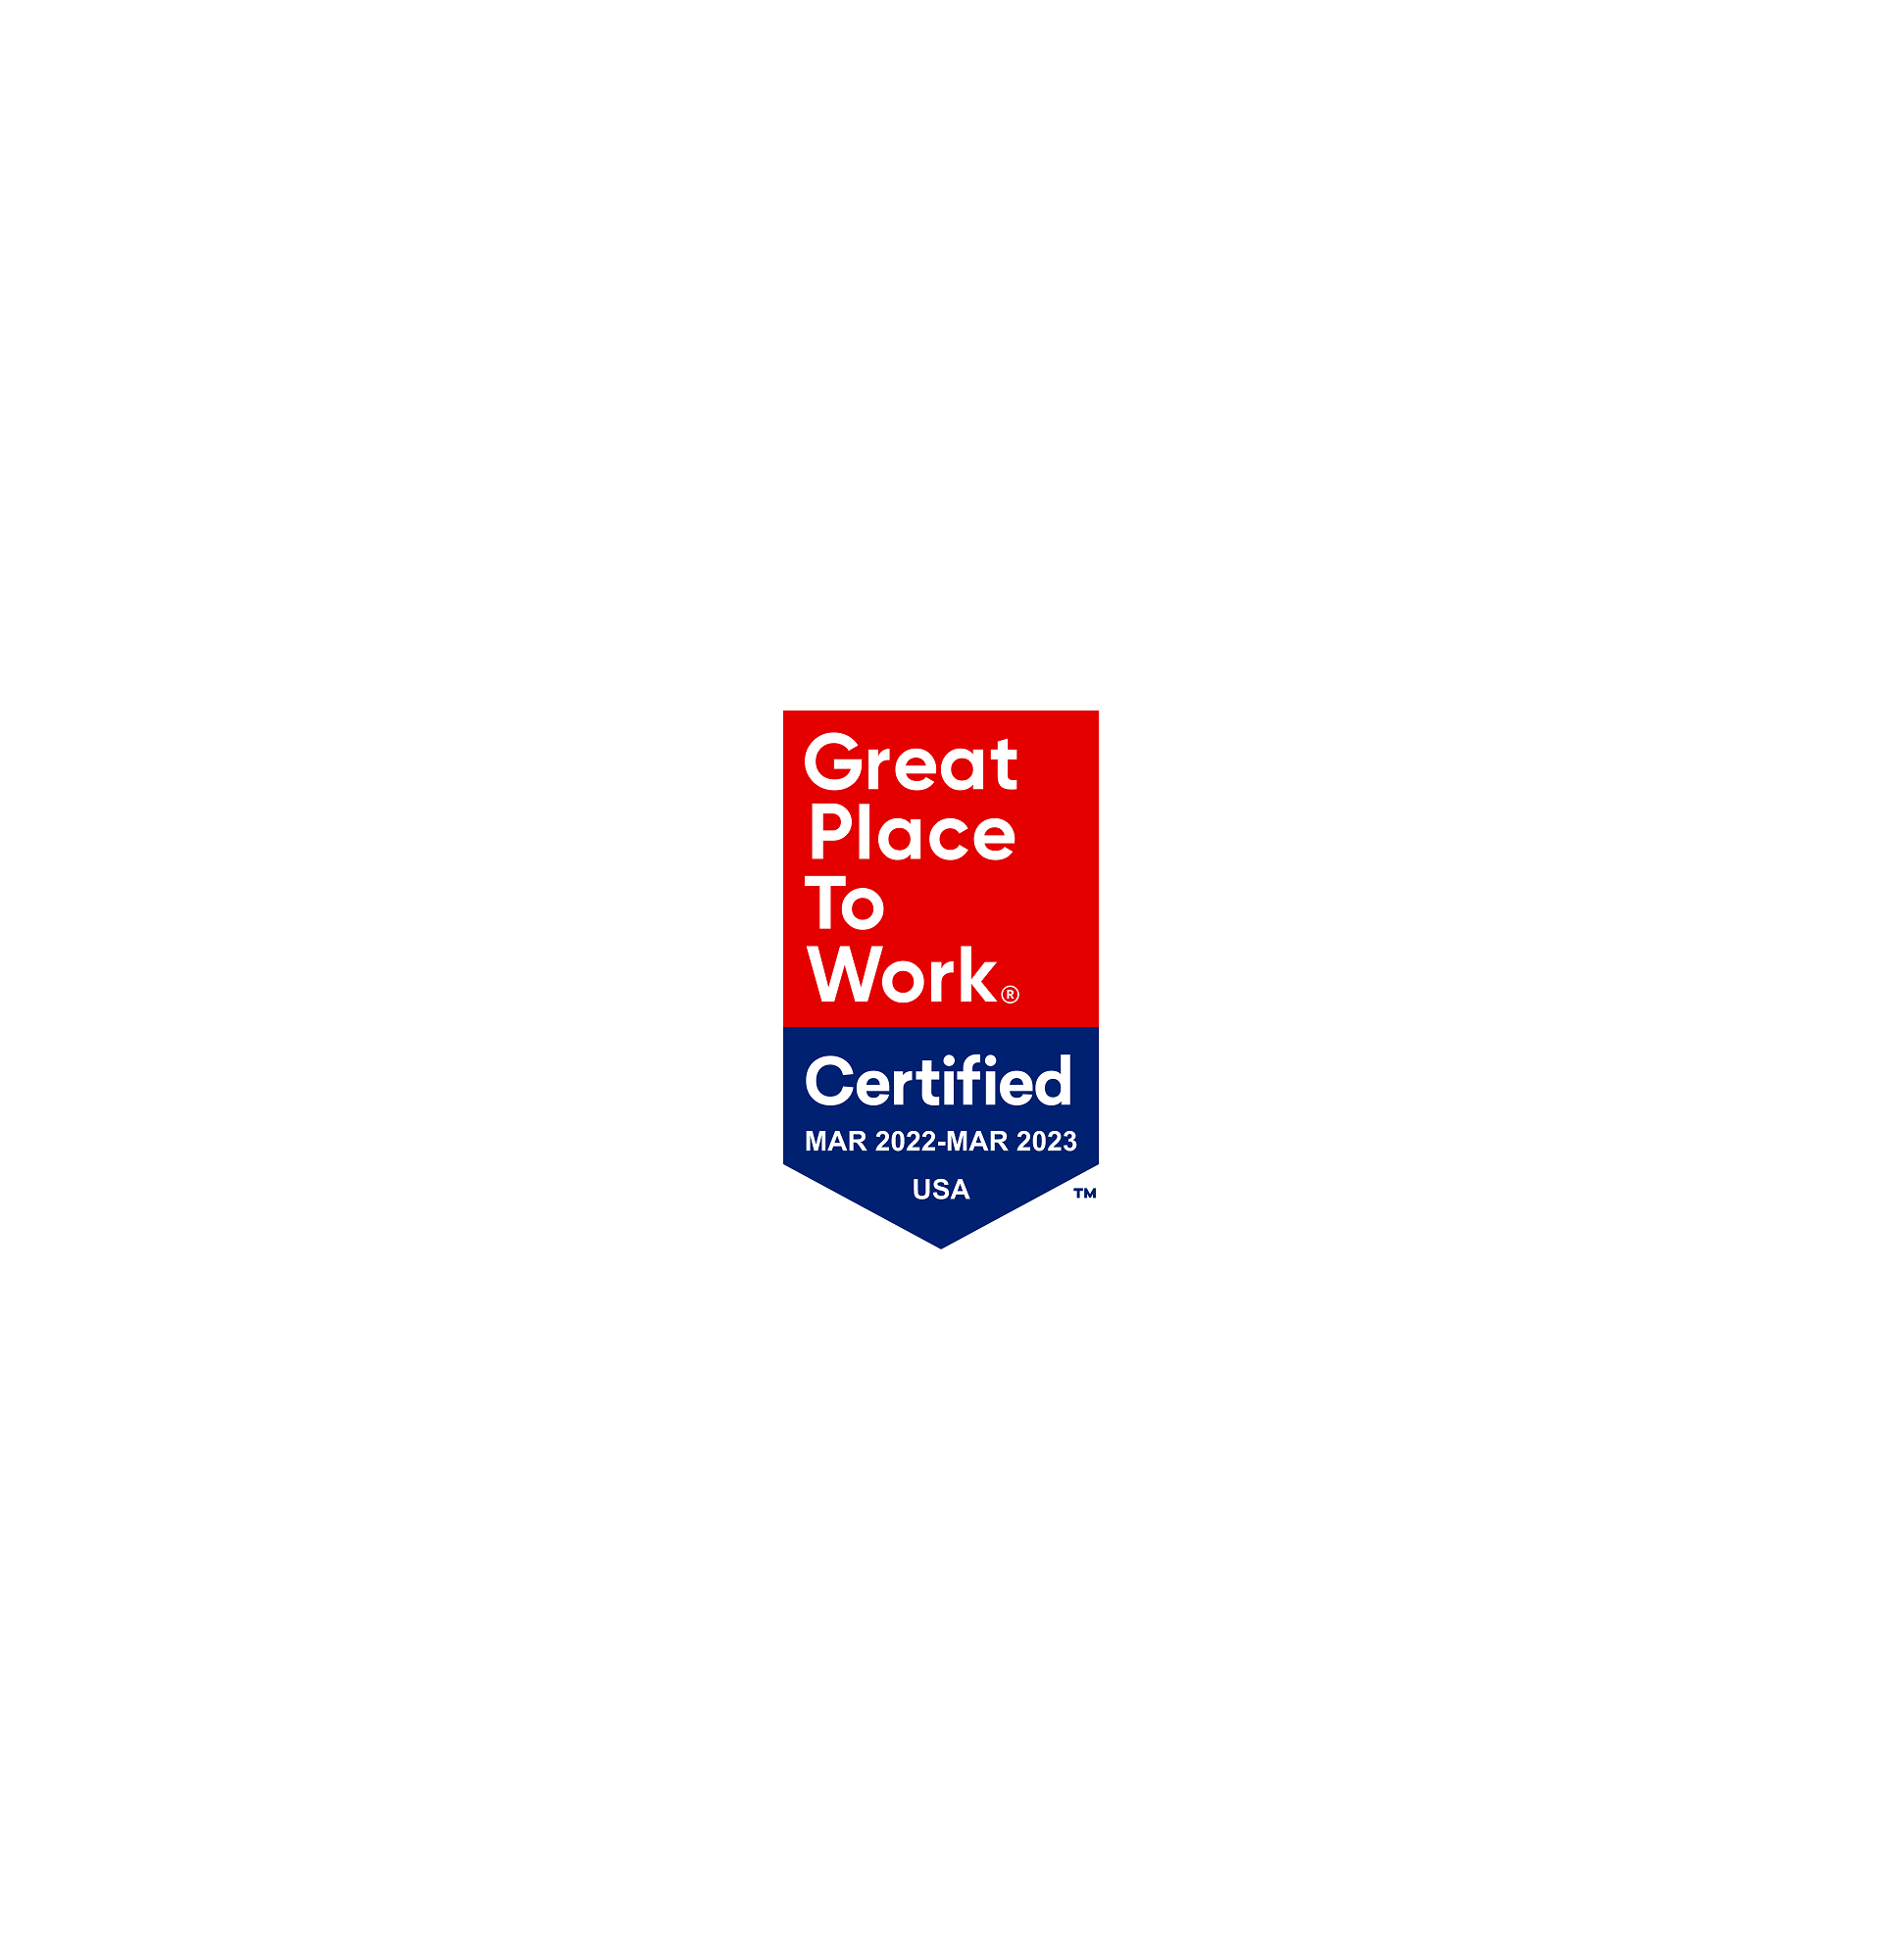 ACR Certified as Great Place to Work